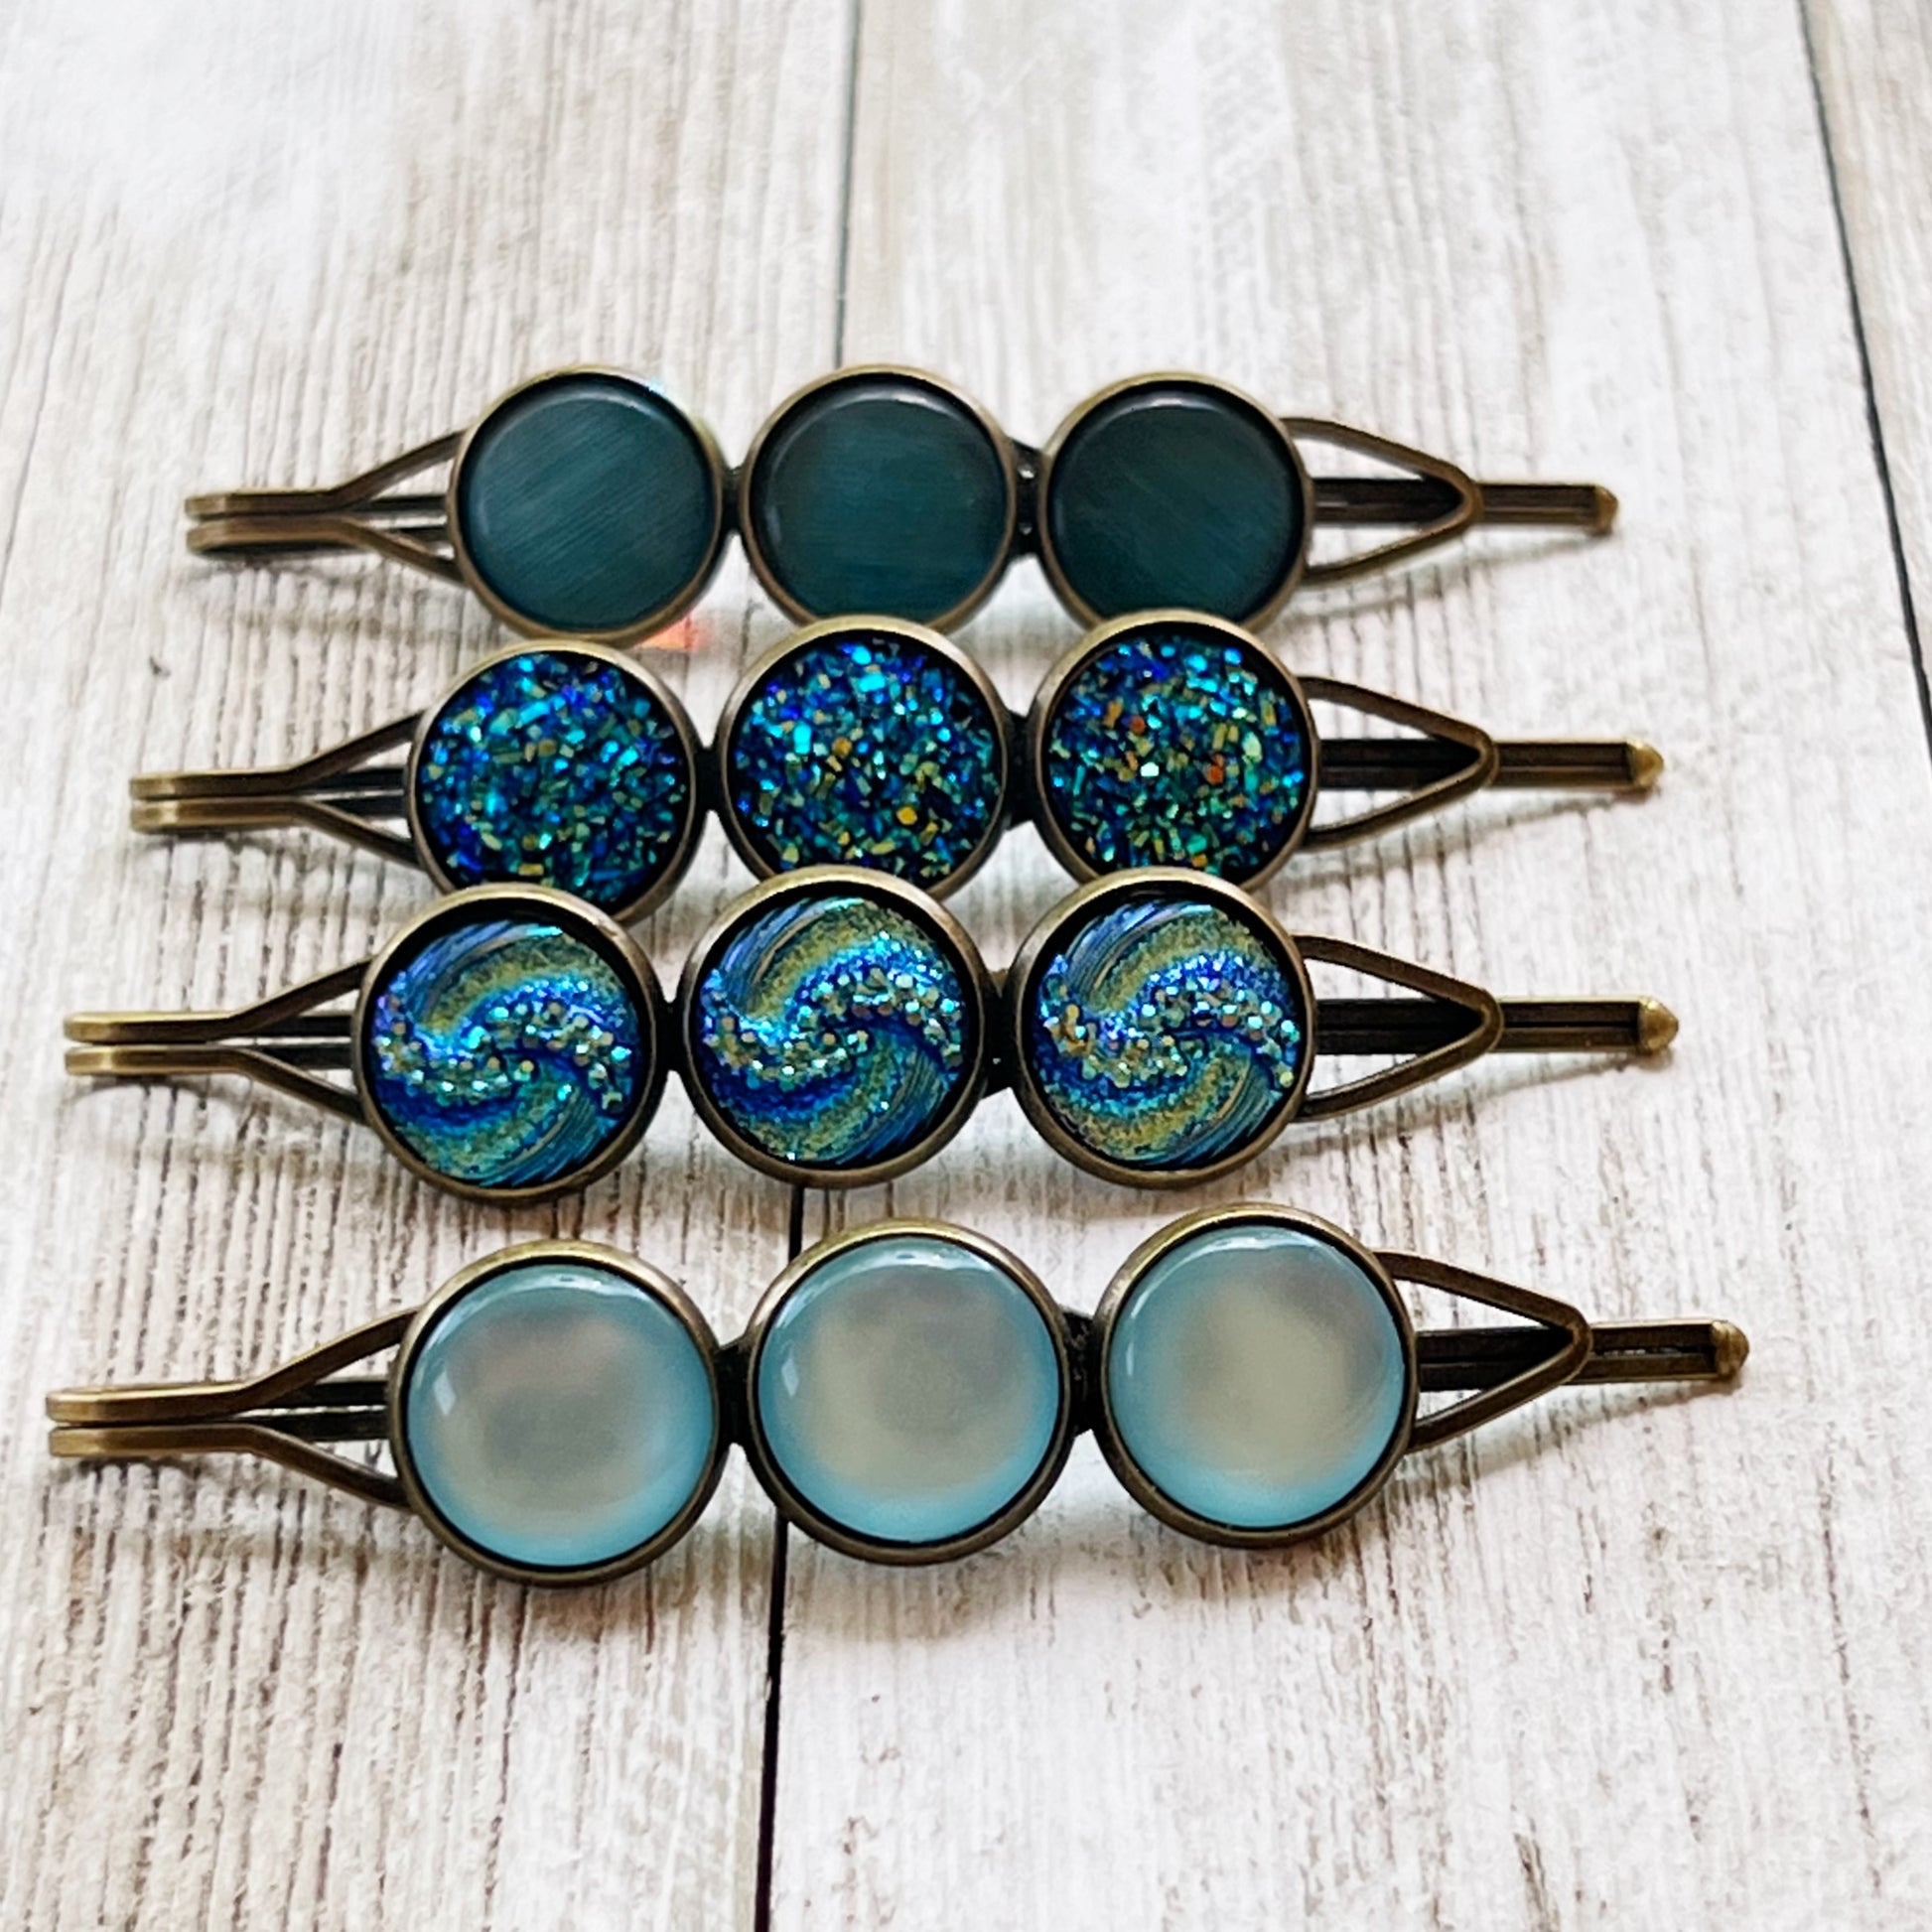 Blue Druzy Hair Pins Set of 4 - Chic Women's Hair Accessories | Hair Clips & Bobby Pins for Stylish Looks